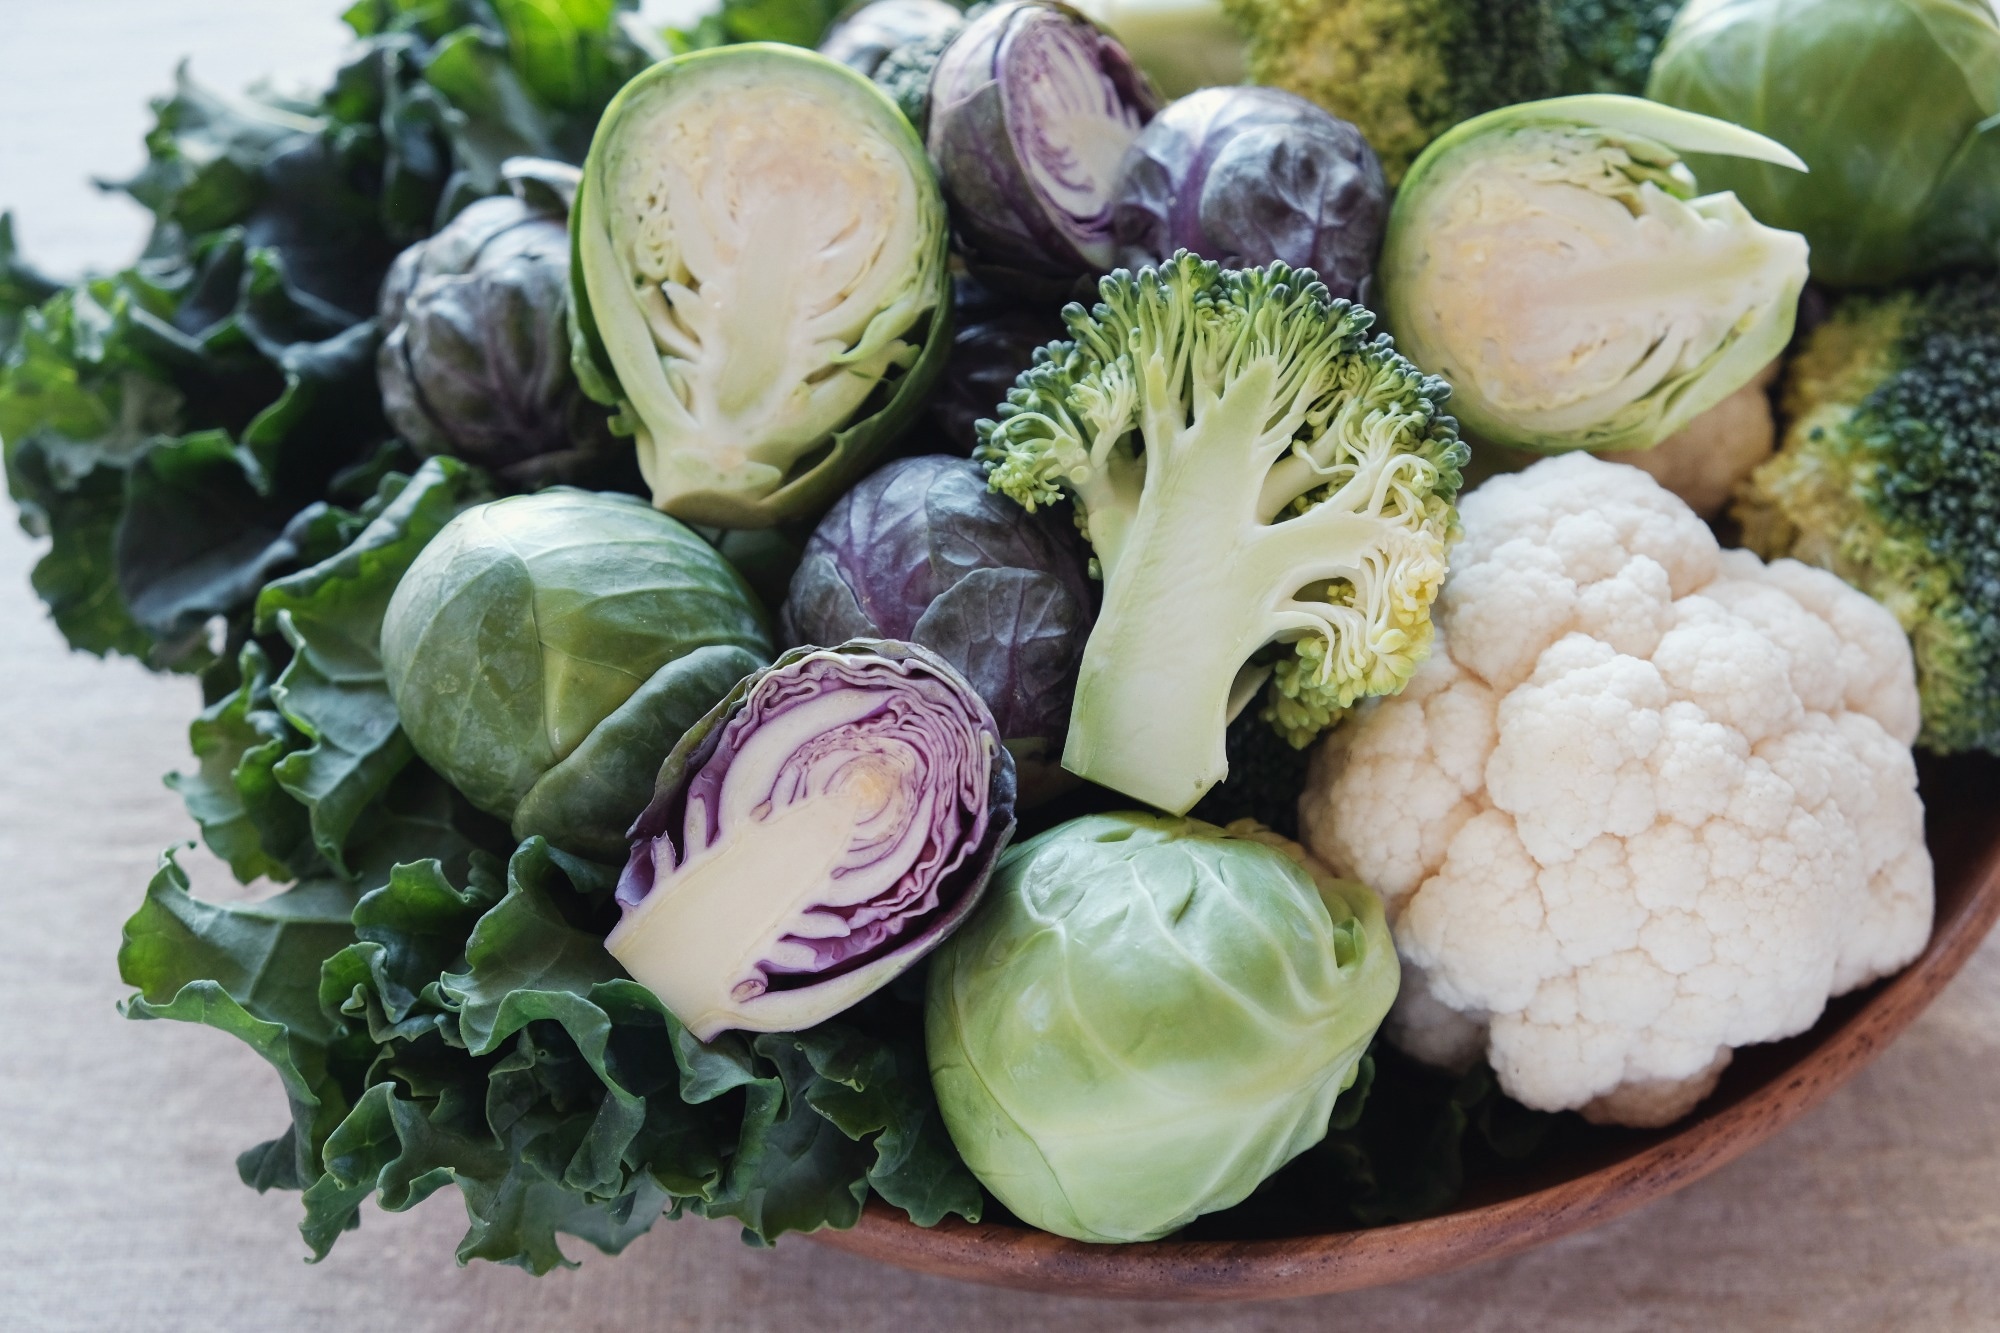 Review: Current knowledge on the preparation and benefits of cruciferous vegetables as relates to in vitro, in vivo, and clinical models of Inflammatory Bowel Disease. Image Credit: SewCreamStudio / Shutterstock